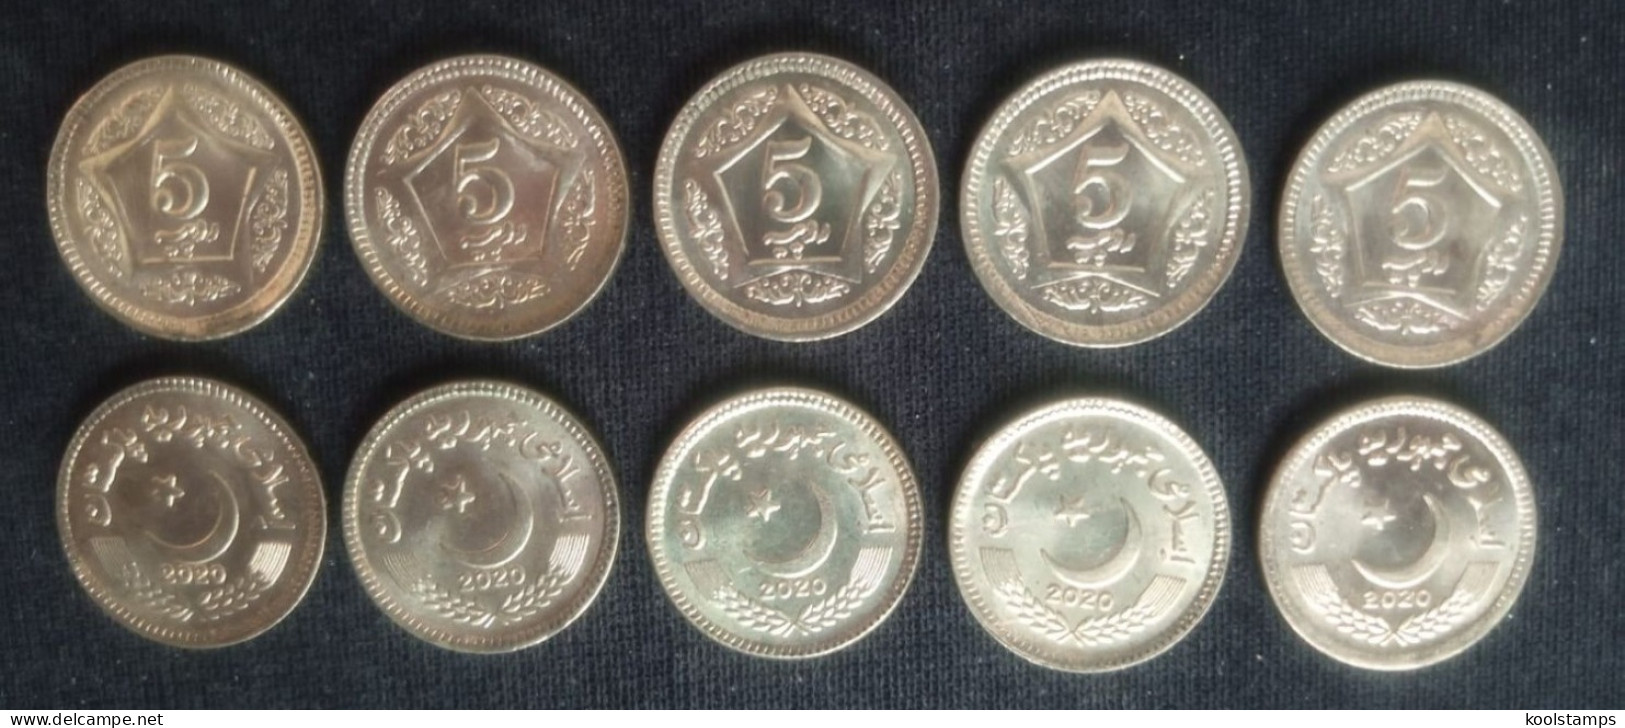 Lot Of 10 X Pakistan 2020 Rs 5 Coin "Regular Issue Coin" UNC - Pakistan